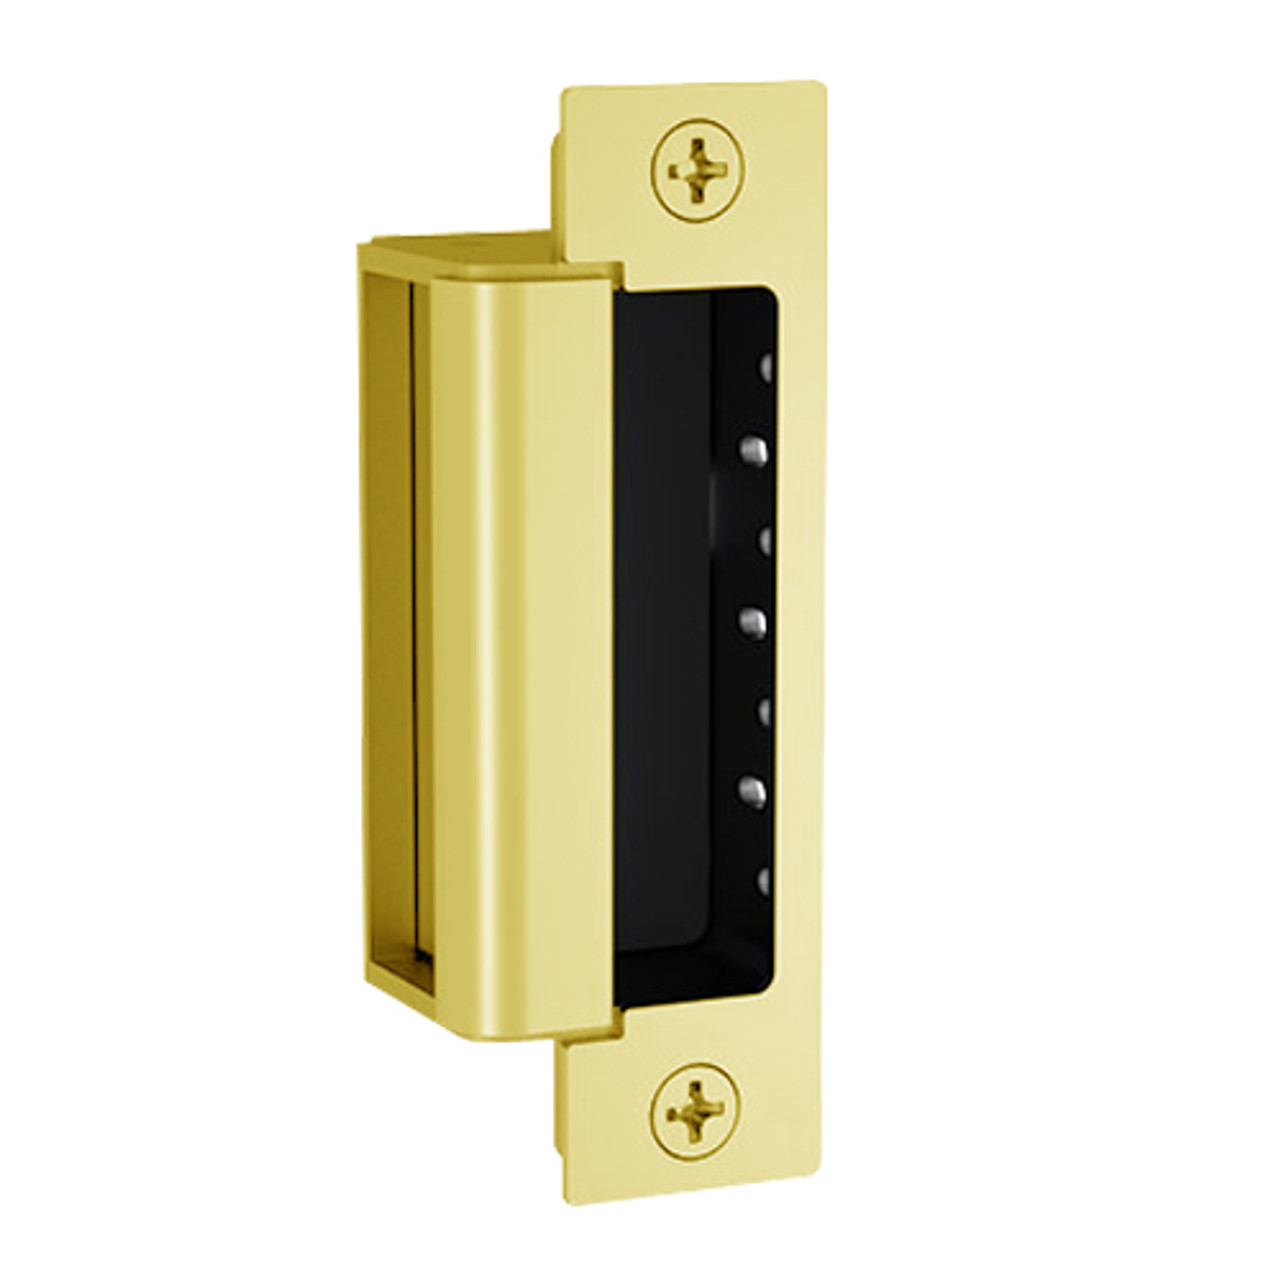 1600-CLB-DLMS-605 Hes 1600 Series Dynamic Low Profile Electric Strike for Latchbolt Lock with Dual Lock Monitor & Strike Monitor in Bright Brass